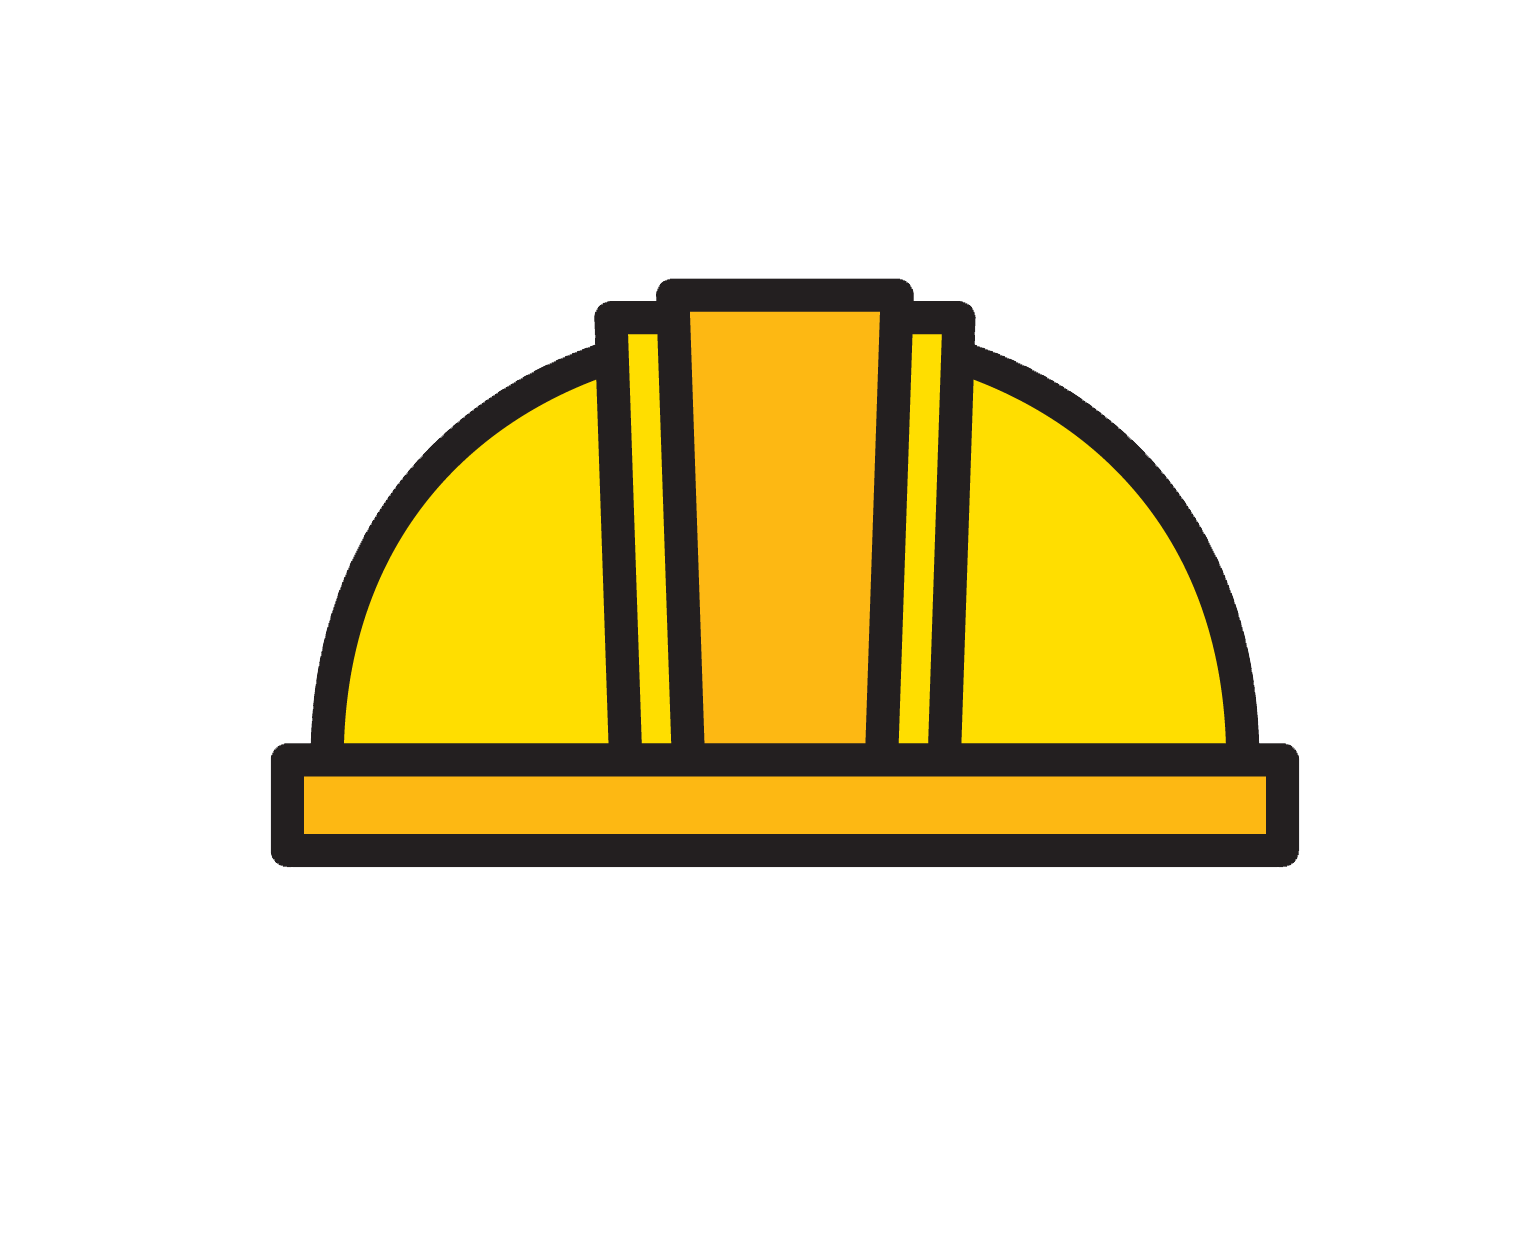 Hard Hat Yellow Architectural Engineering Icon Yellow Construction Helmet Png Download 1527